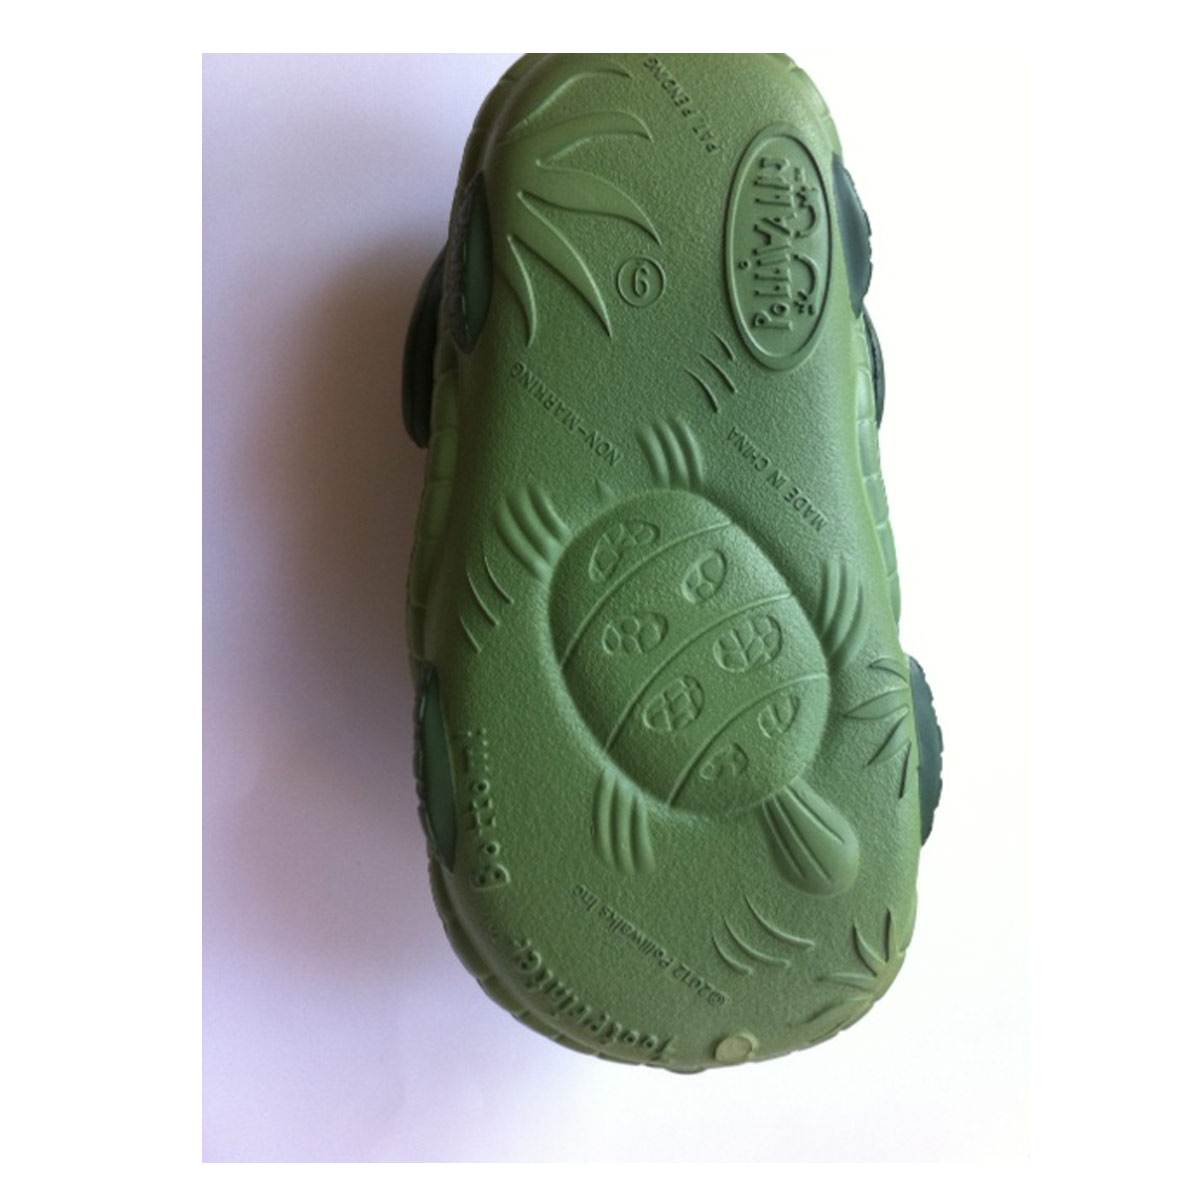 Polliwalks : Toddler shoes Timmy the Turtle Green # 11